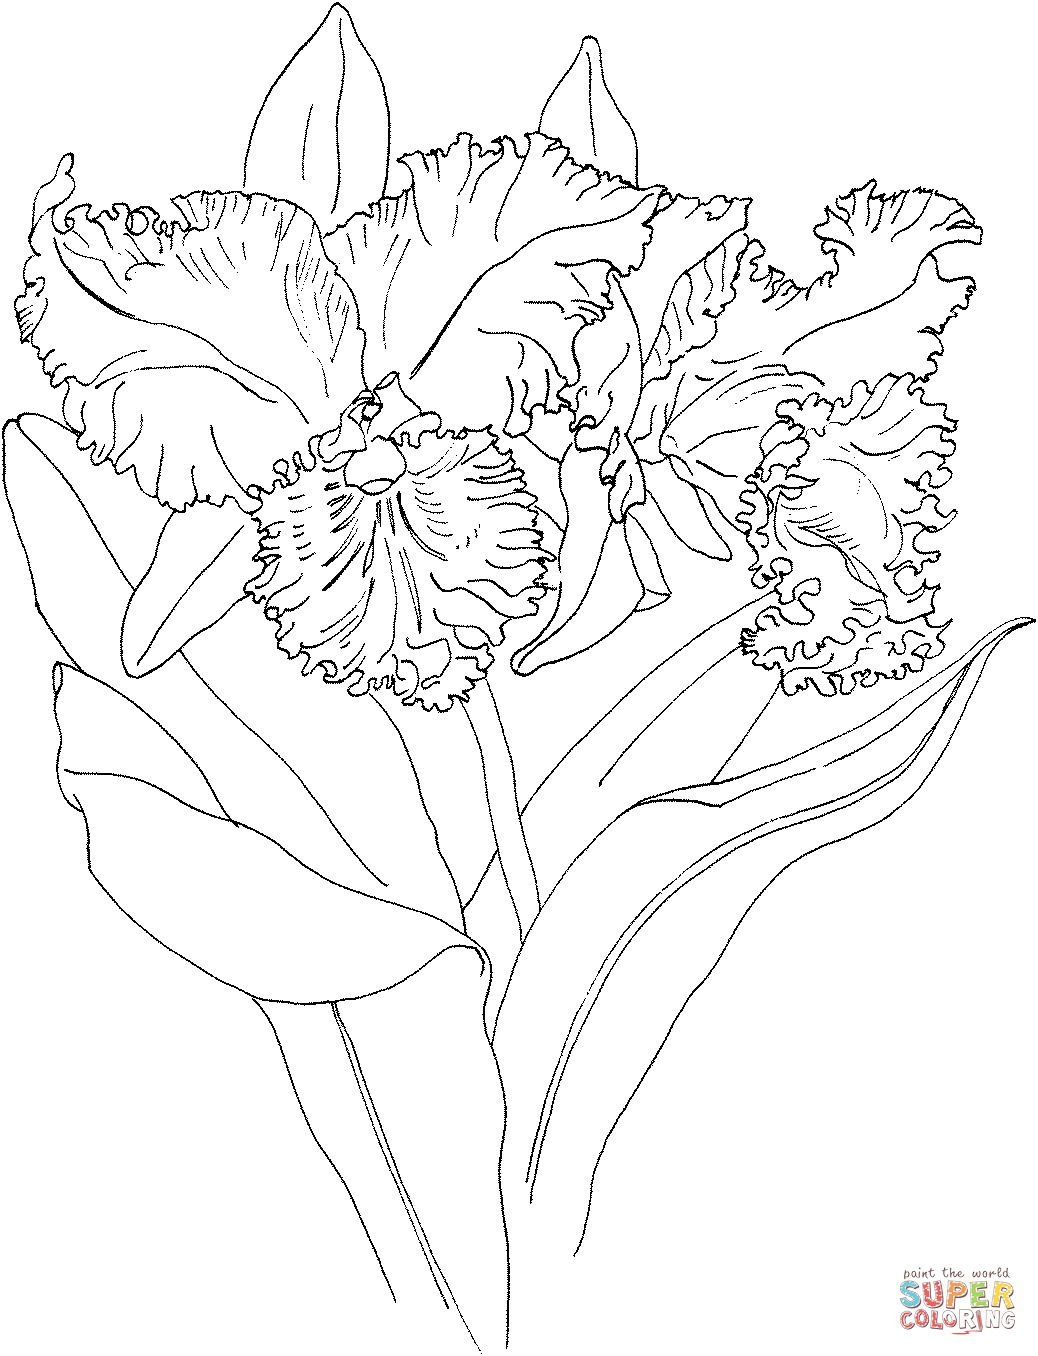 Blc memoria crispin rosales orchid coloring page free printable coloring pages